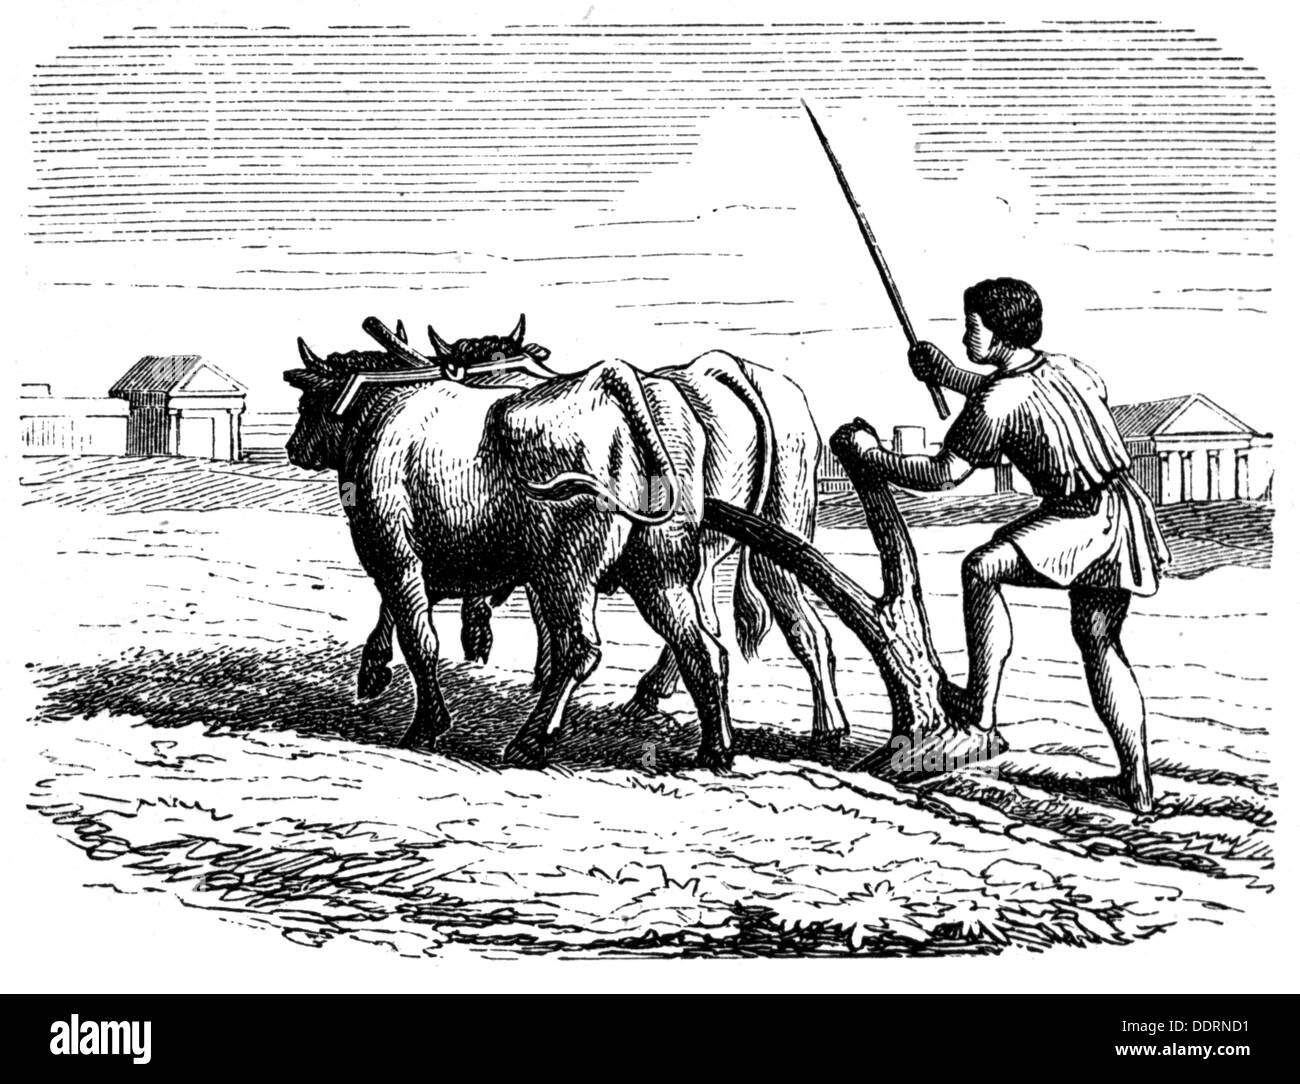 agriculture, agricultural work, plowing, Roman farmer with plough, circa 700 BC, wood engraving, 19th century, Roman, Romans, Italy, ancient world, ancient times, people, men, man, tillage, tilth, arable farming, draught animal, draught animals, working animal, work animal, working animals, ox, oxen, hook plough, field, fields, Rome, agriculture, farming, agricultural work, farm labour, farm labor, farmer, farmers, plough, plow, ploughs, plows, historic, historical, ancient world, male, Additional-Rights-Clearences-Not Available Stock Photo